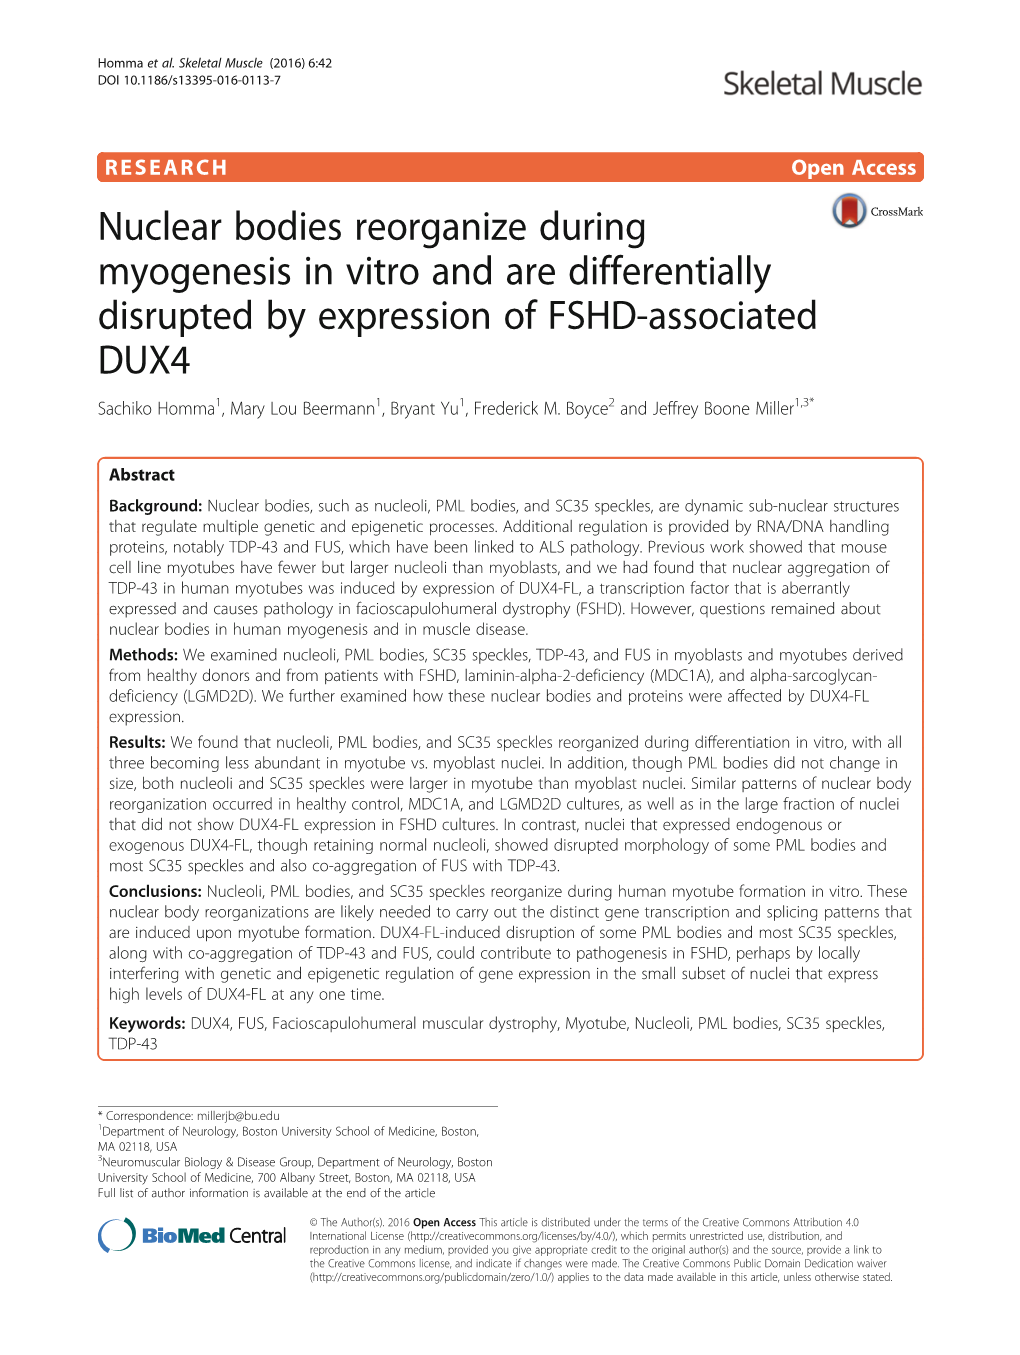 Nuclear Bodies Reorganize During Myogenesis in Vitro and Are